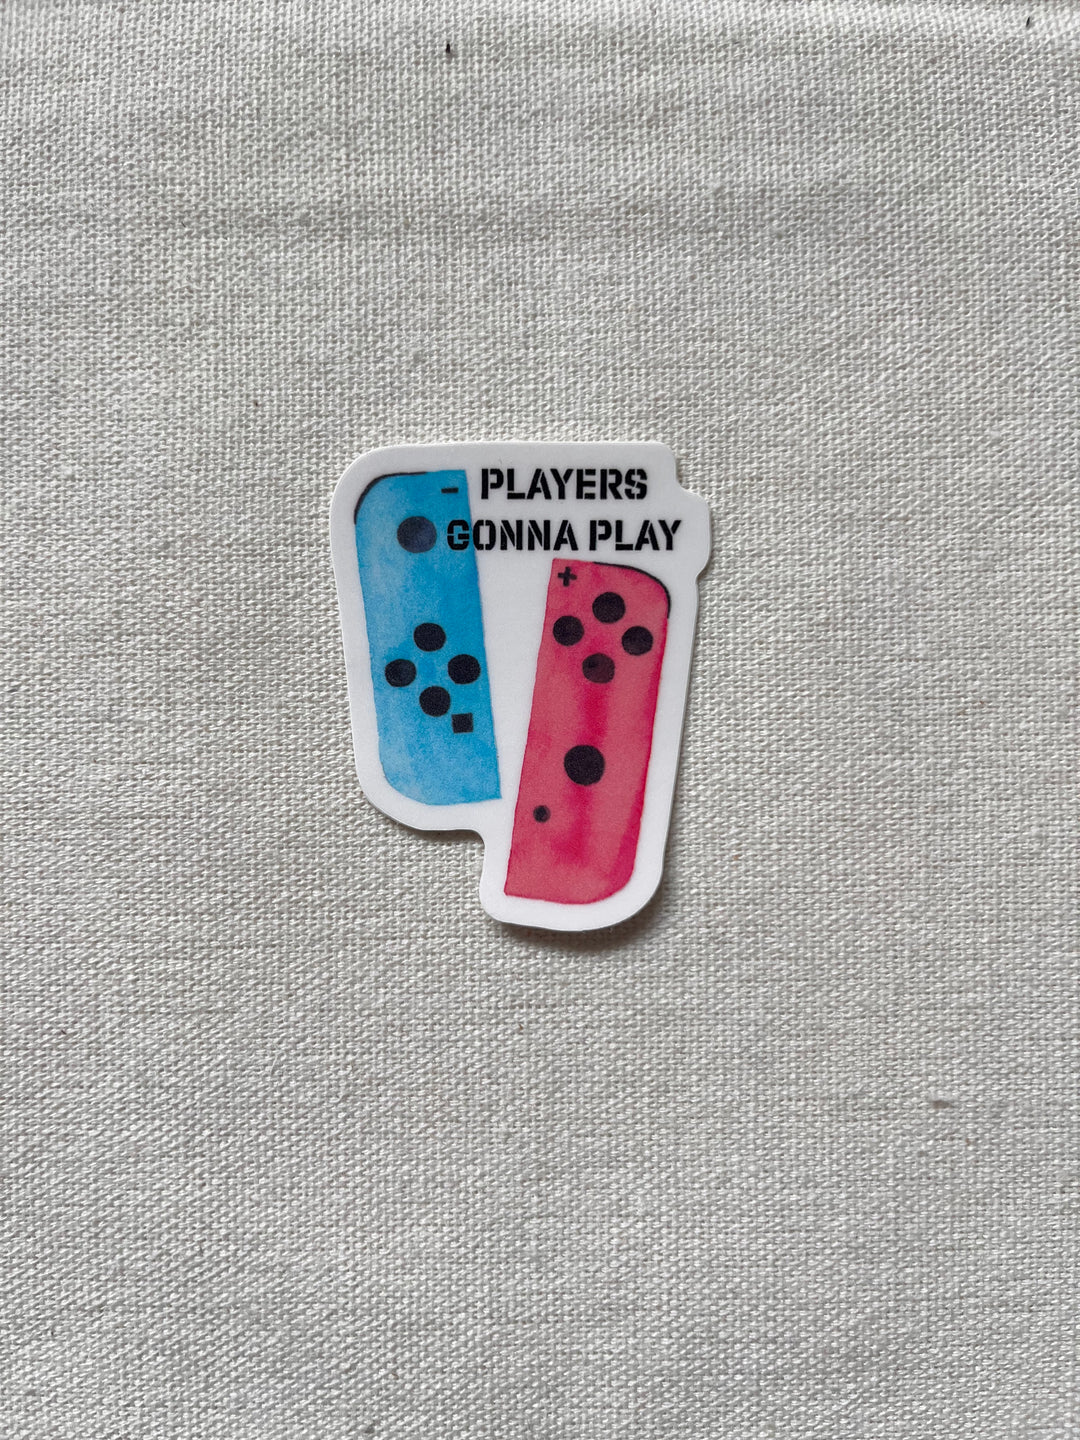 Players Gonna Play Sticker